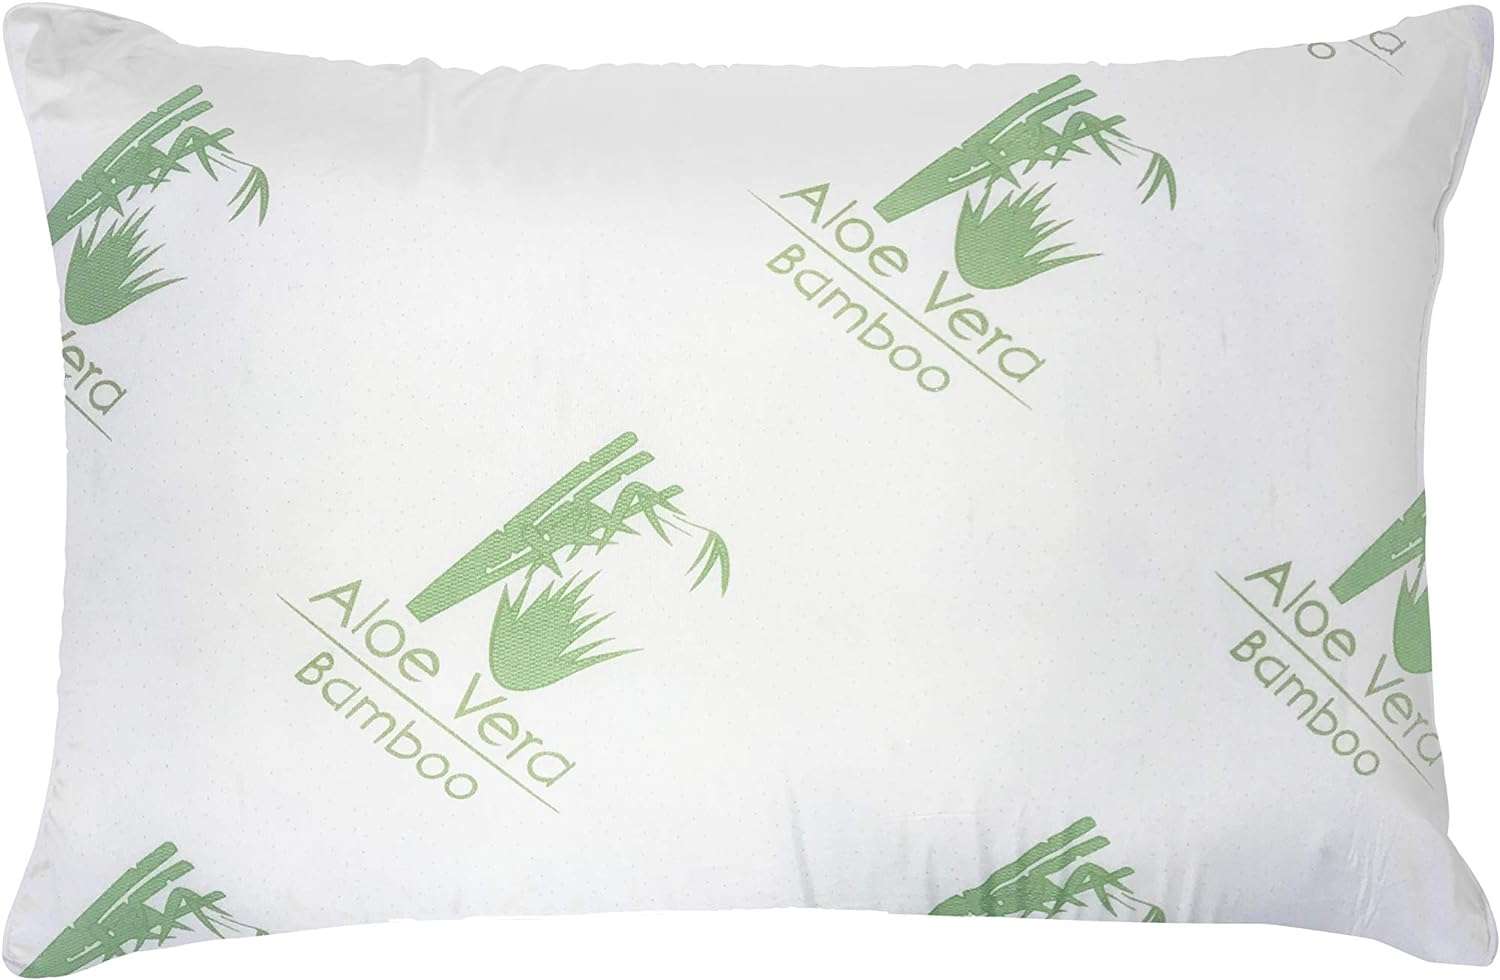 Country Club Aloe Vera Bamboo Pillow - Fluffy Memory Foam Hypoallergenic Cooling Comfort